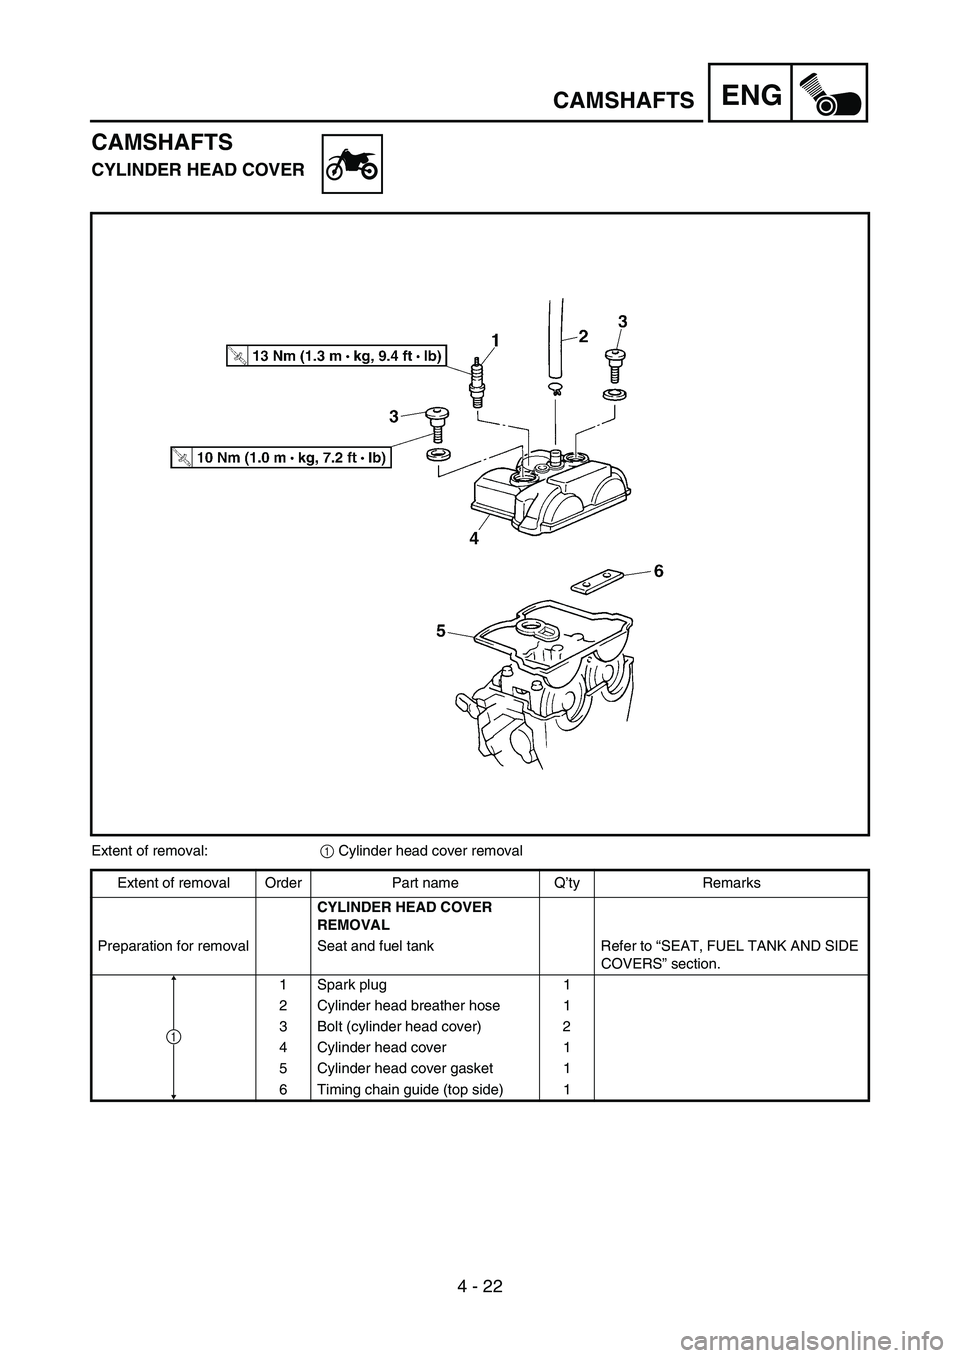 YAMAHA YZ250F 2007  Owners Manual 4 - 22
ENGCAMSHAFTS
CAMSHAFTS
CYLINDER HEAD COVER
Extent of removal:
1 Cylinder head cover removal
Extent of removal Order Part name Q’ty Remarks
CYLINDER HEAD COVER 
REMOVAL
Preparation for removal